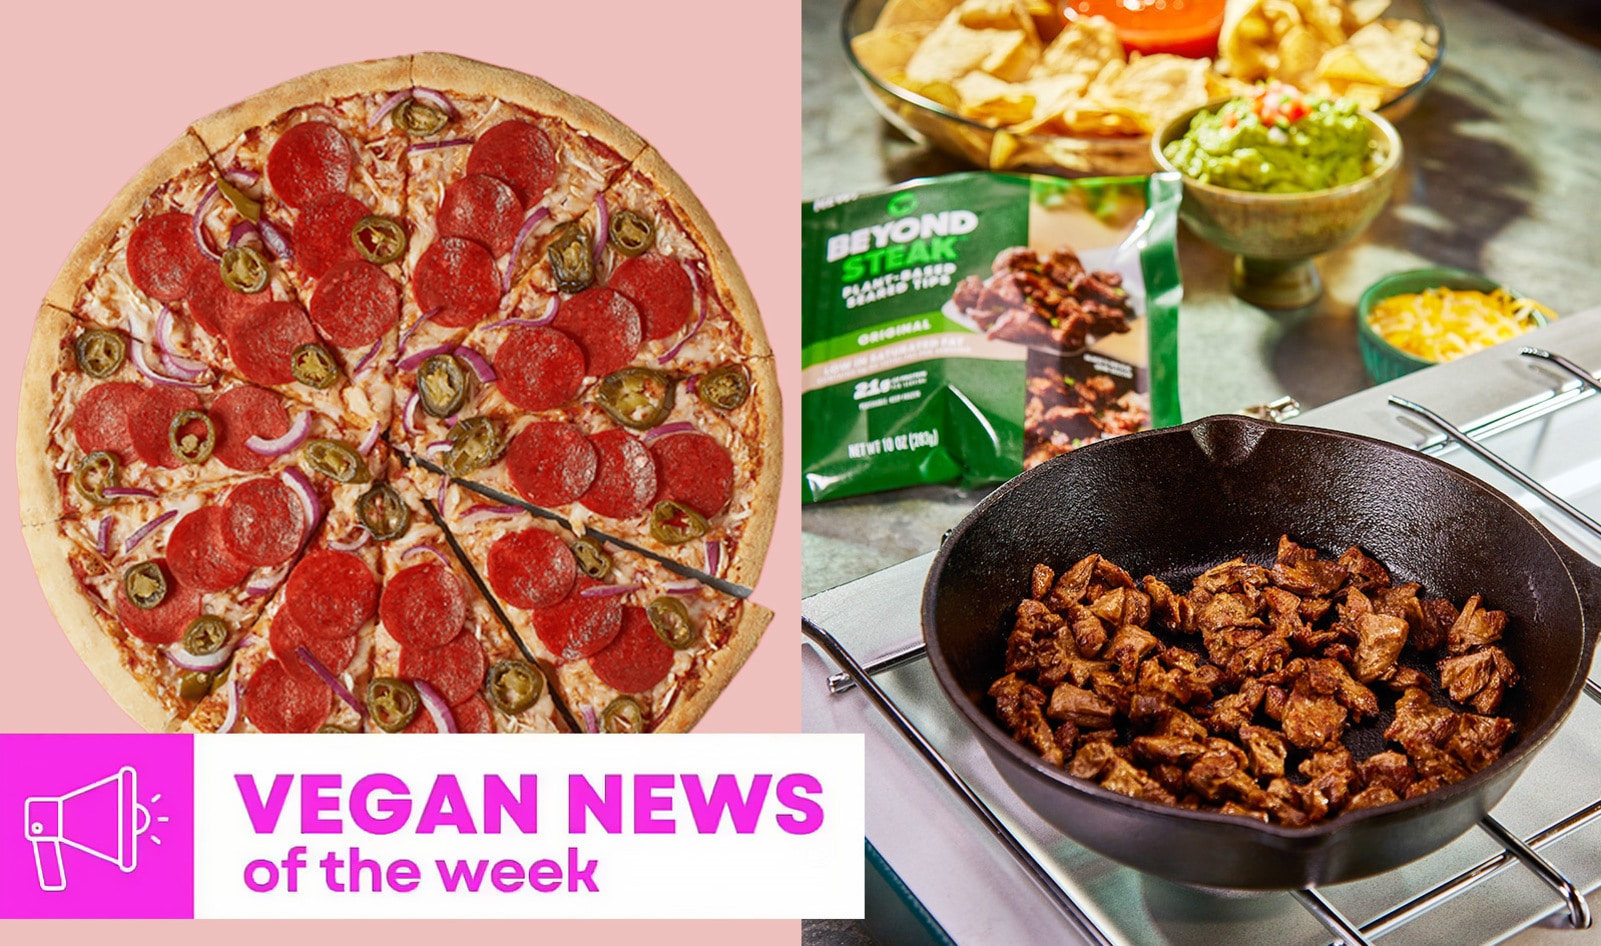 Domino's Spicy Pizza, Beyond Steak at Costco, and More Vegan Food News of the Week